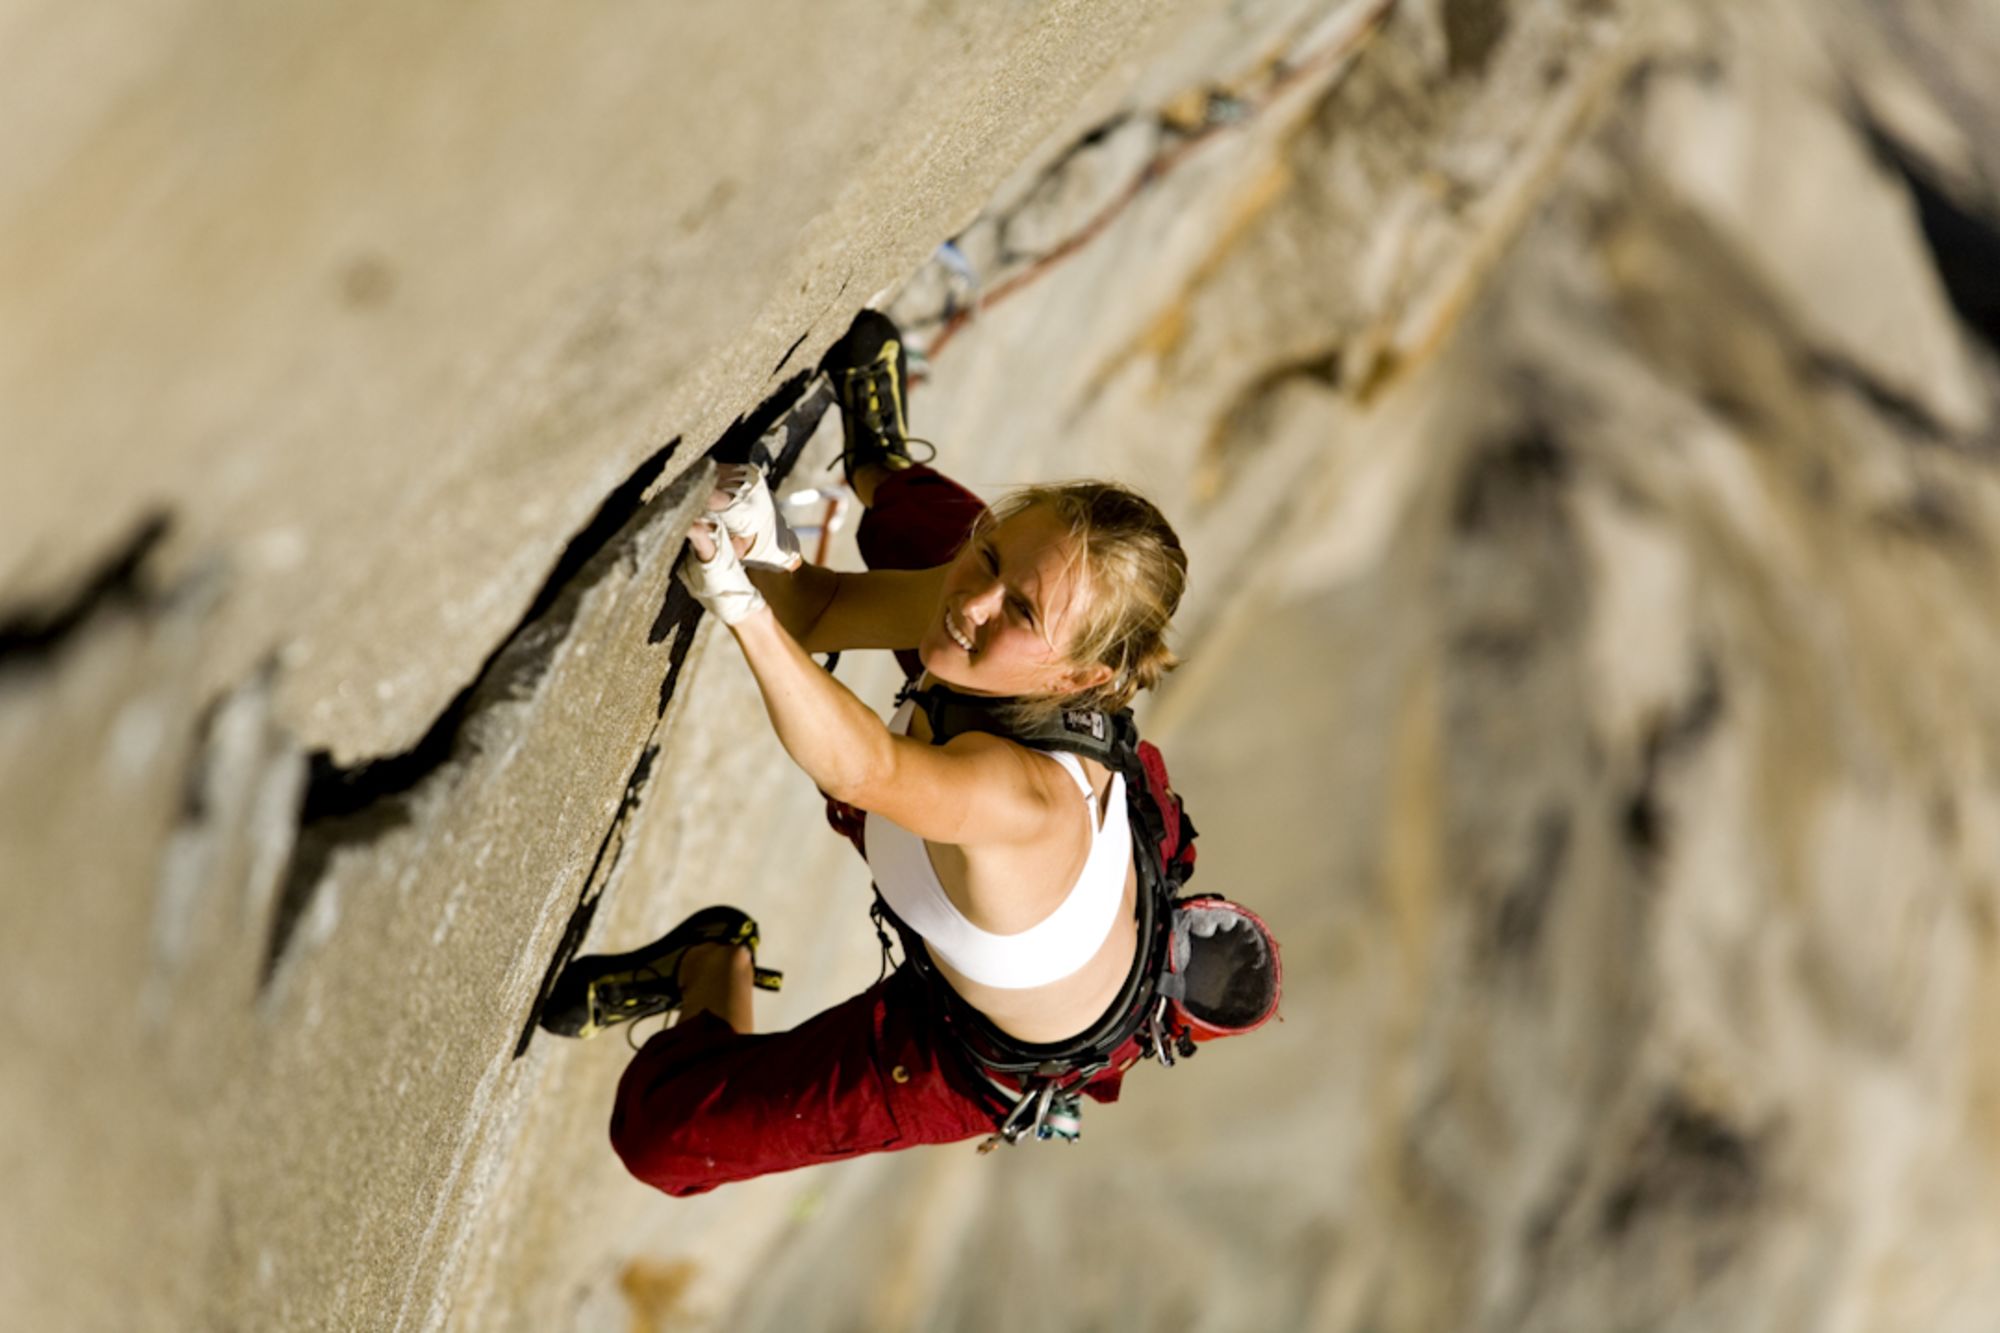 Rodden is famed for having scaled some of what are still considered to be the hardest routes in climbing.